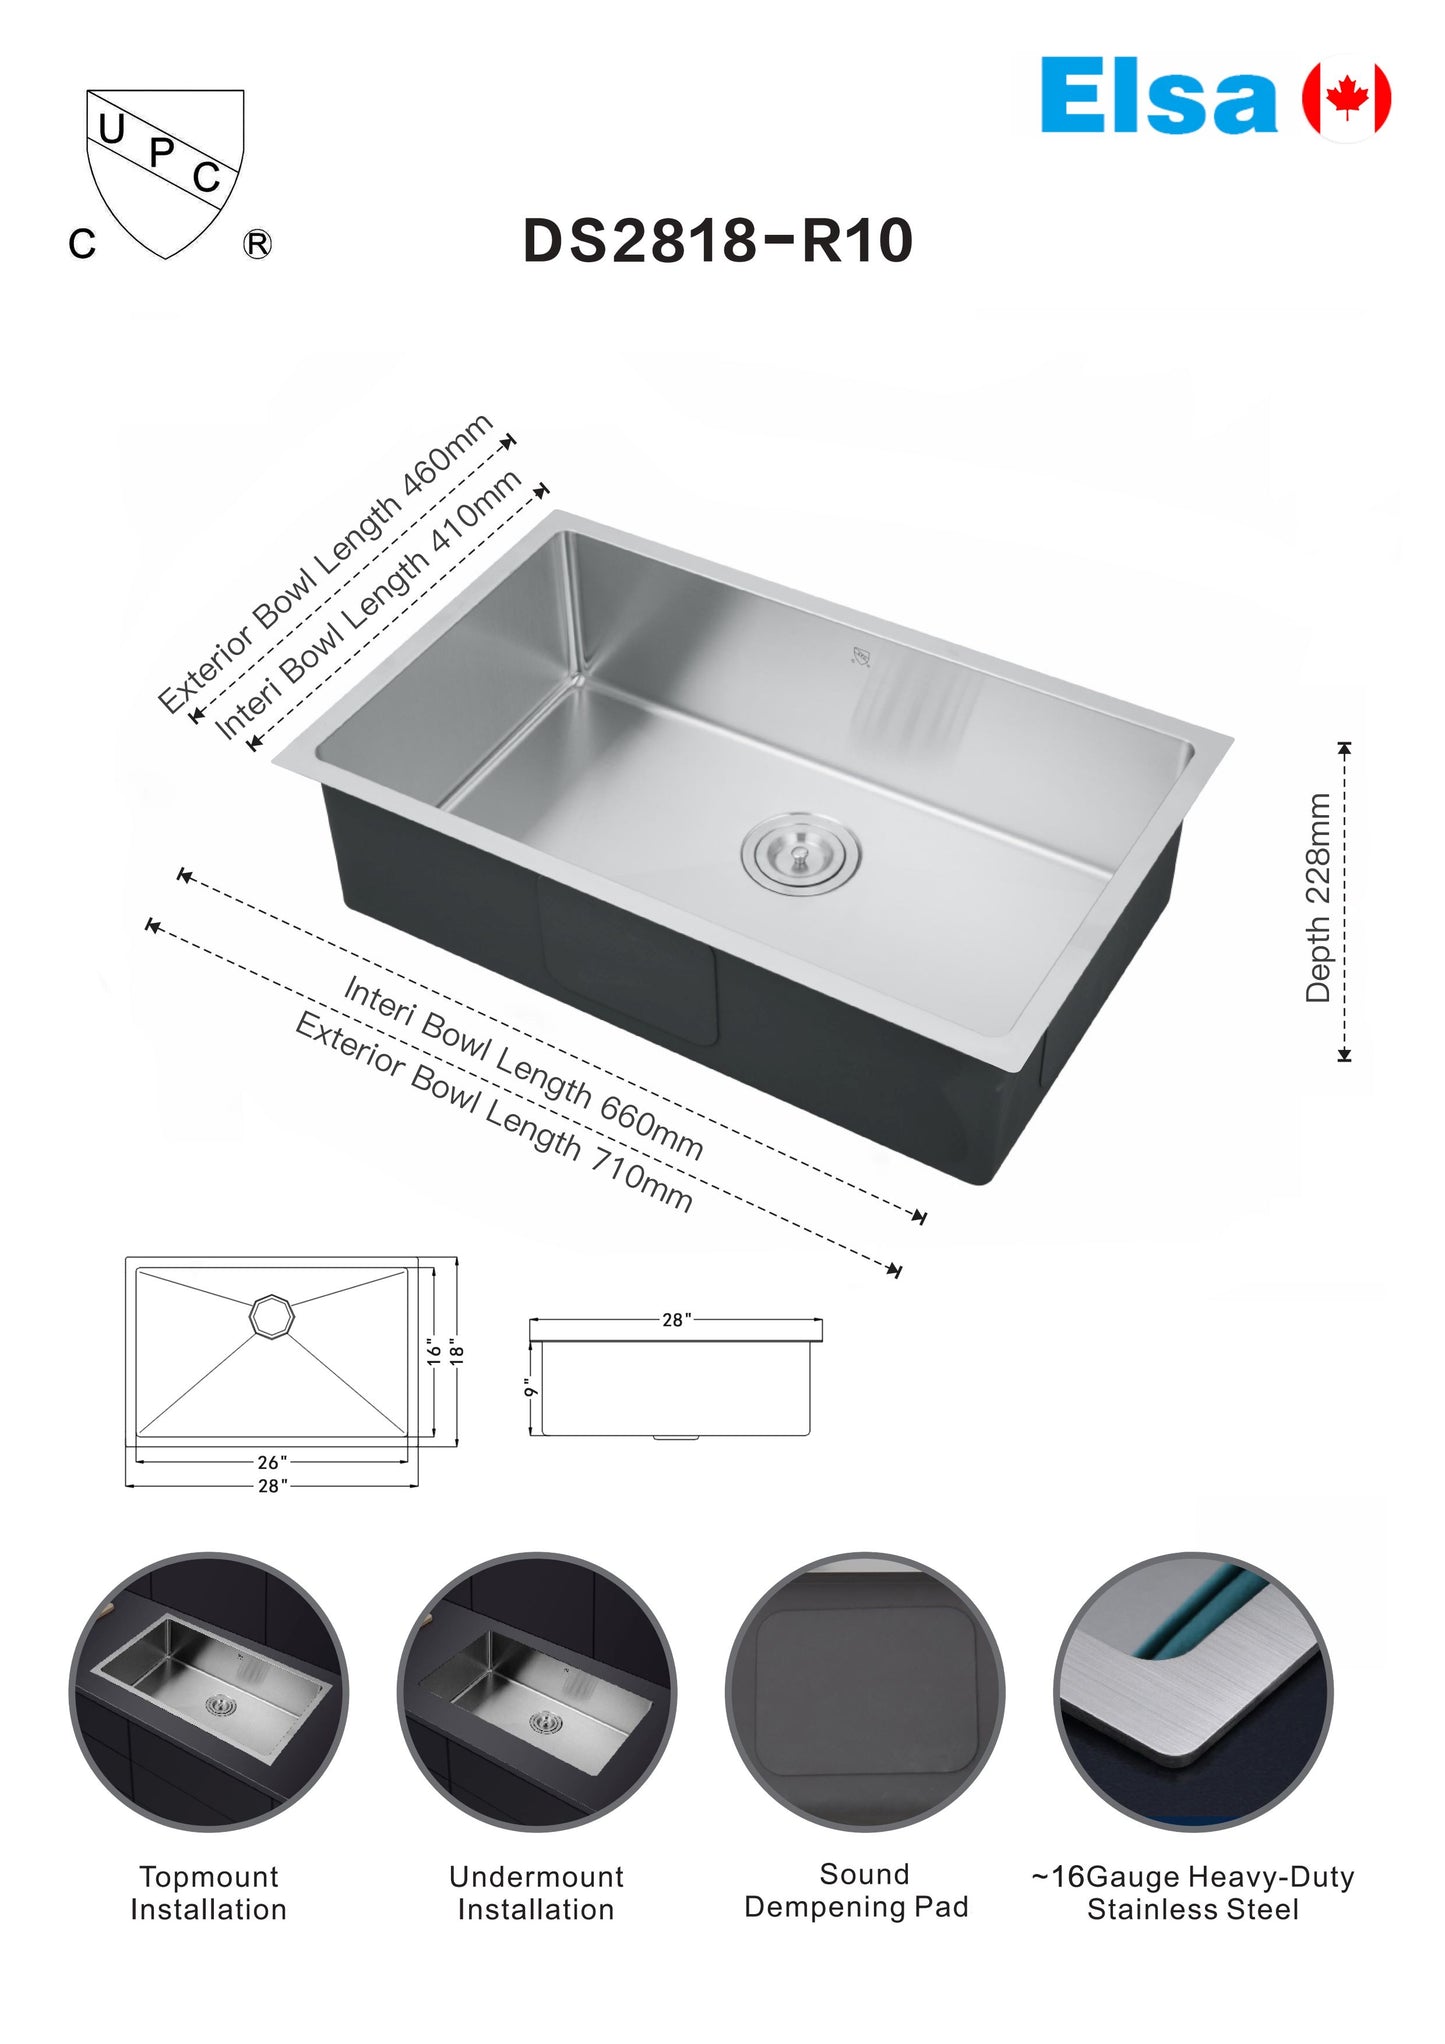 *PROMOTION* DS2818-R10 handmade kitchen sink undermount single bowl (drains not included) new brown box 710x460x228mm exterior 28"x18"x9" interior 26"x16"x9" $119/pc